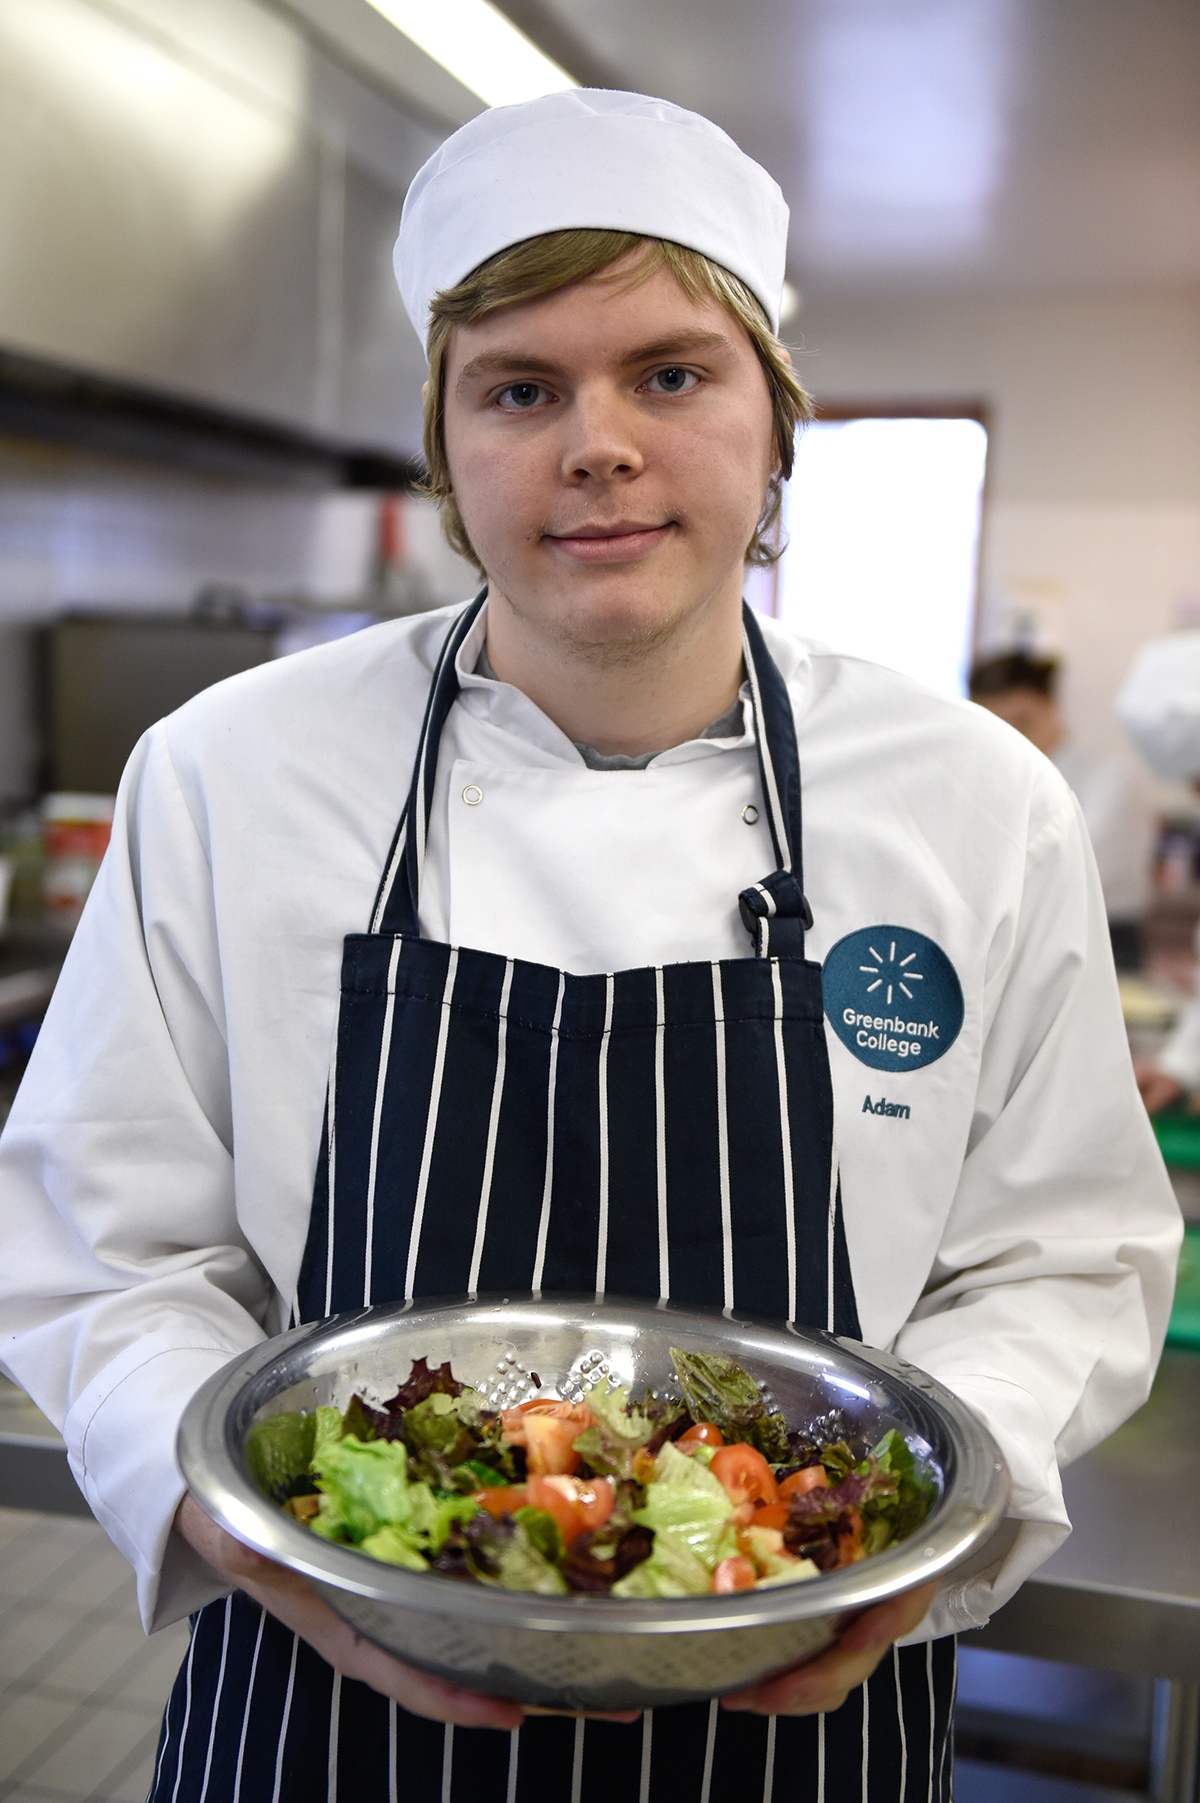 Catering student Adam with a prepared salad